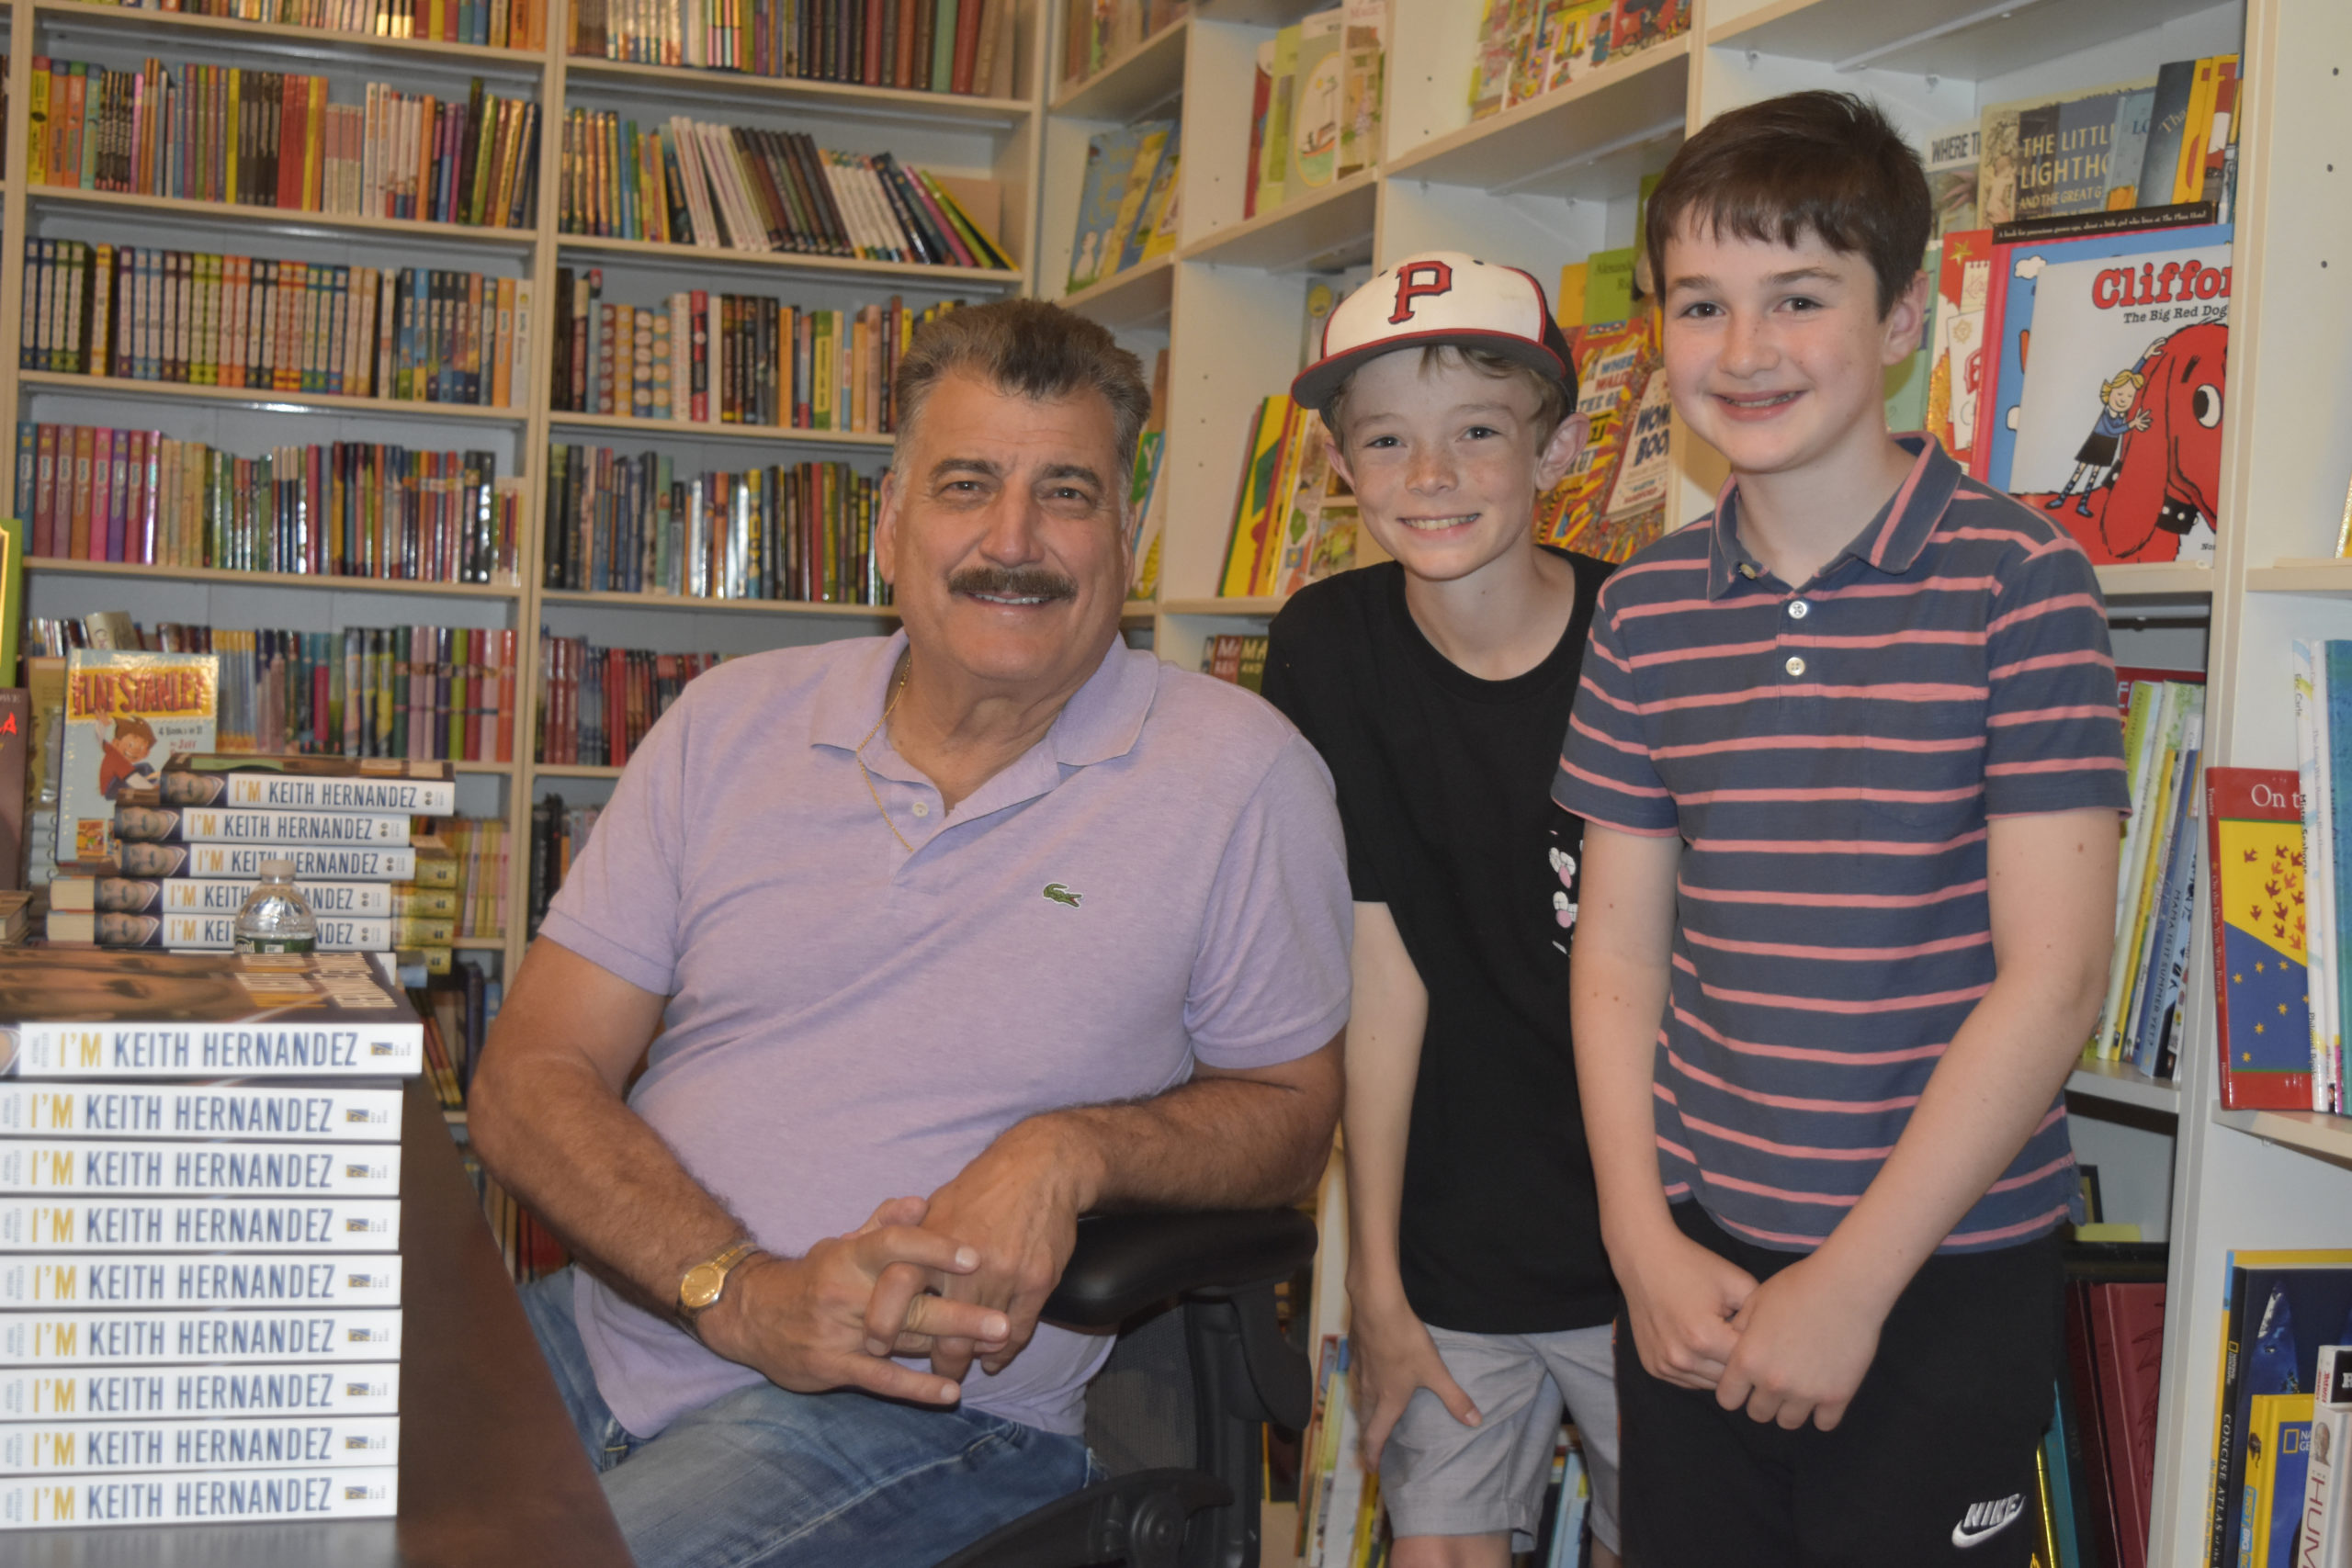 A Big Hit 
June 27 -- Keith Hernandez signed his booked, 